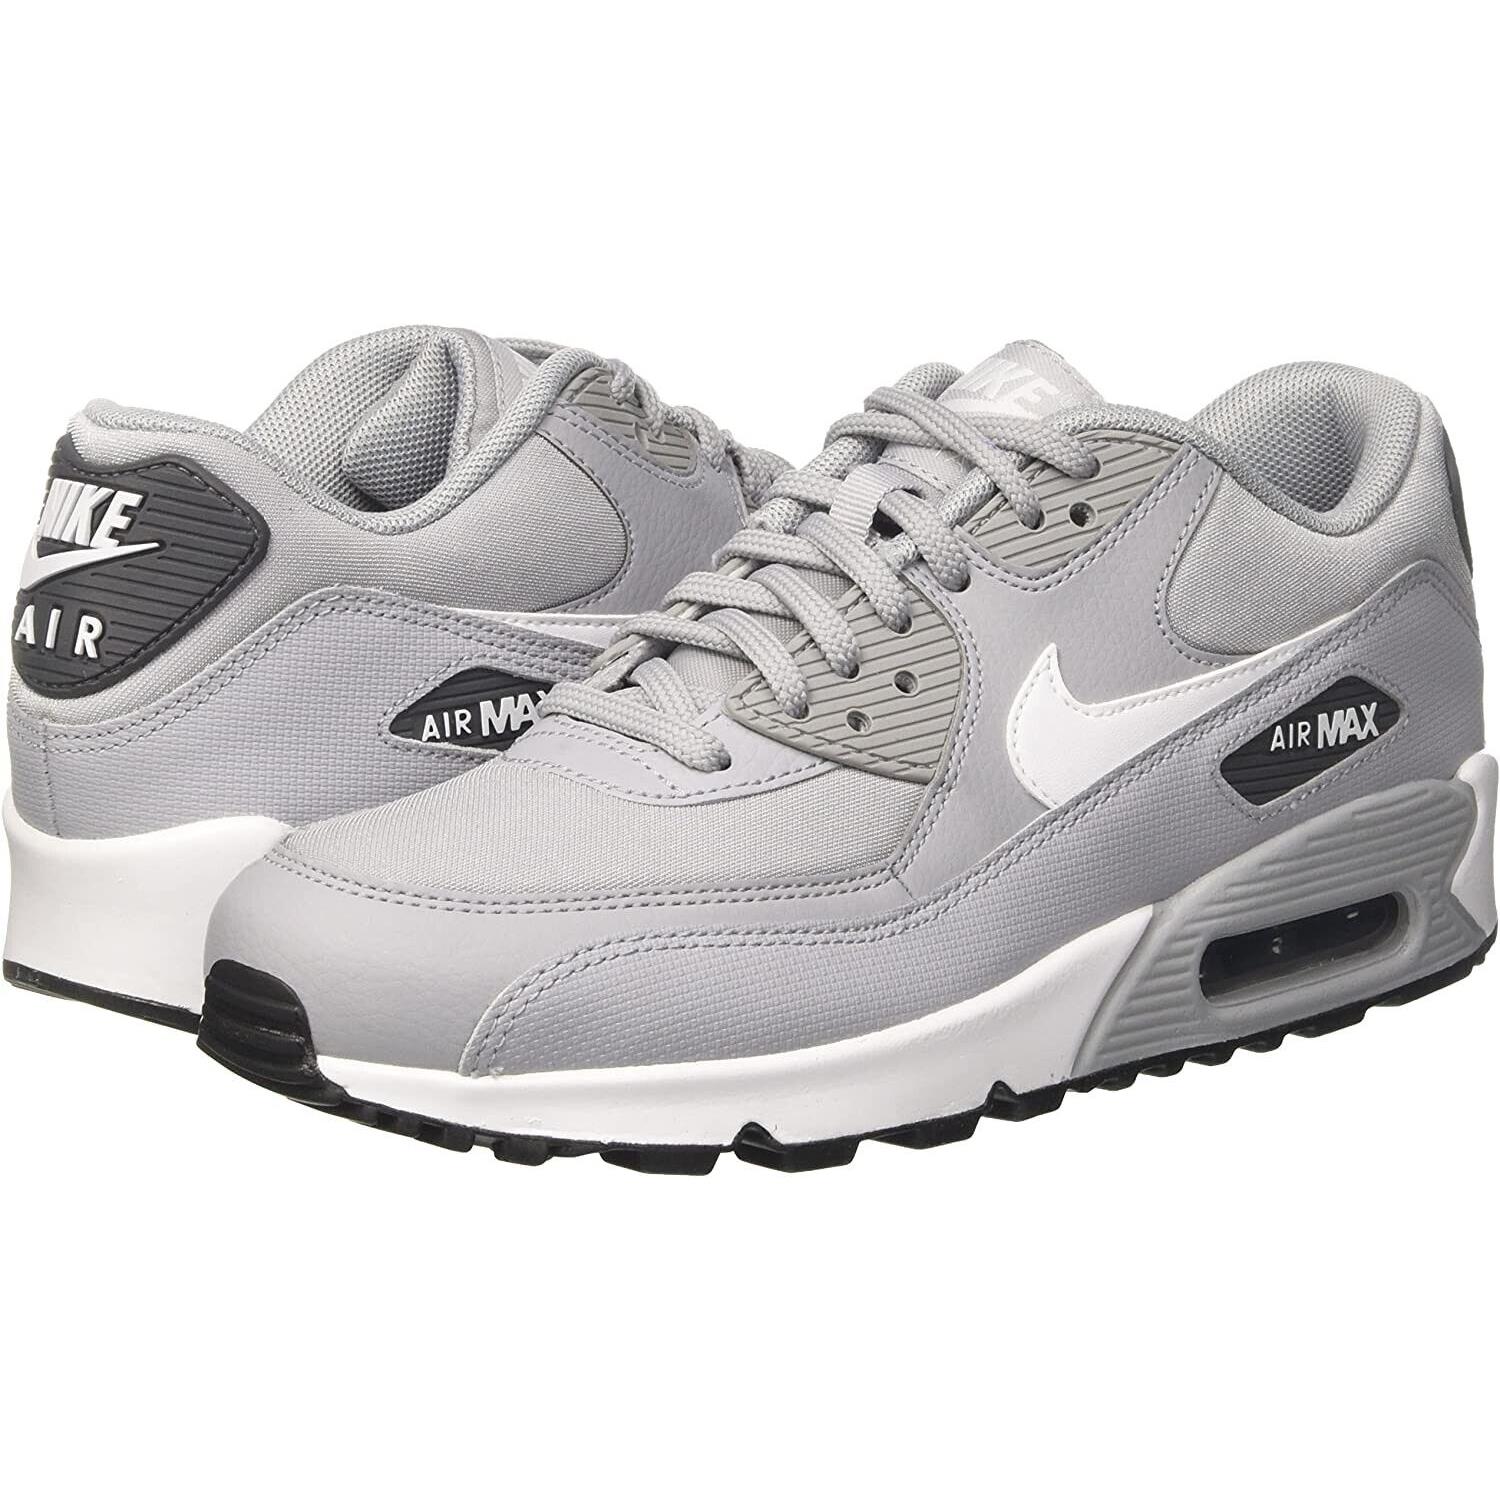 Nike Women`s 11 Air Max 90 Sneakers Gray/white/black Athletic Shoes